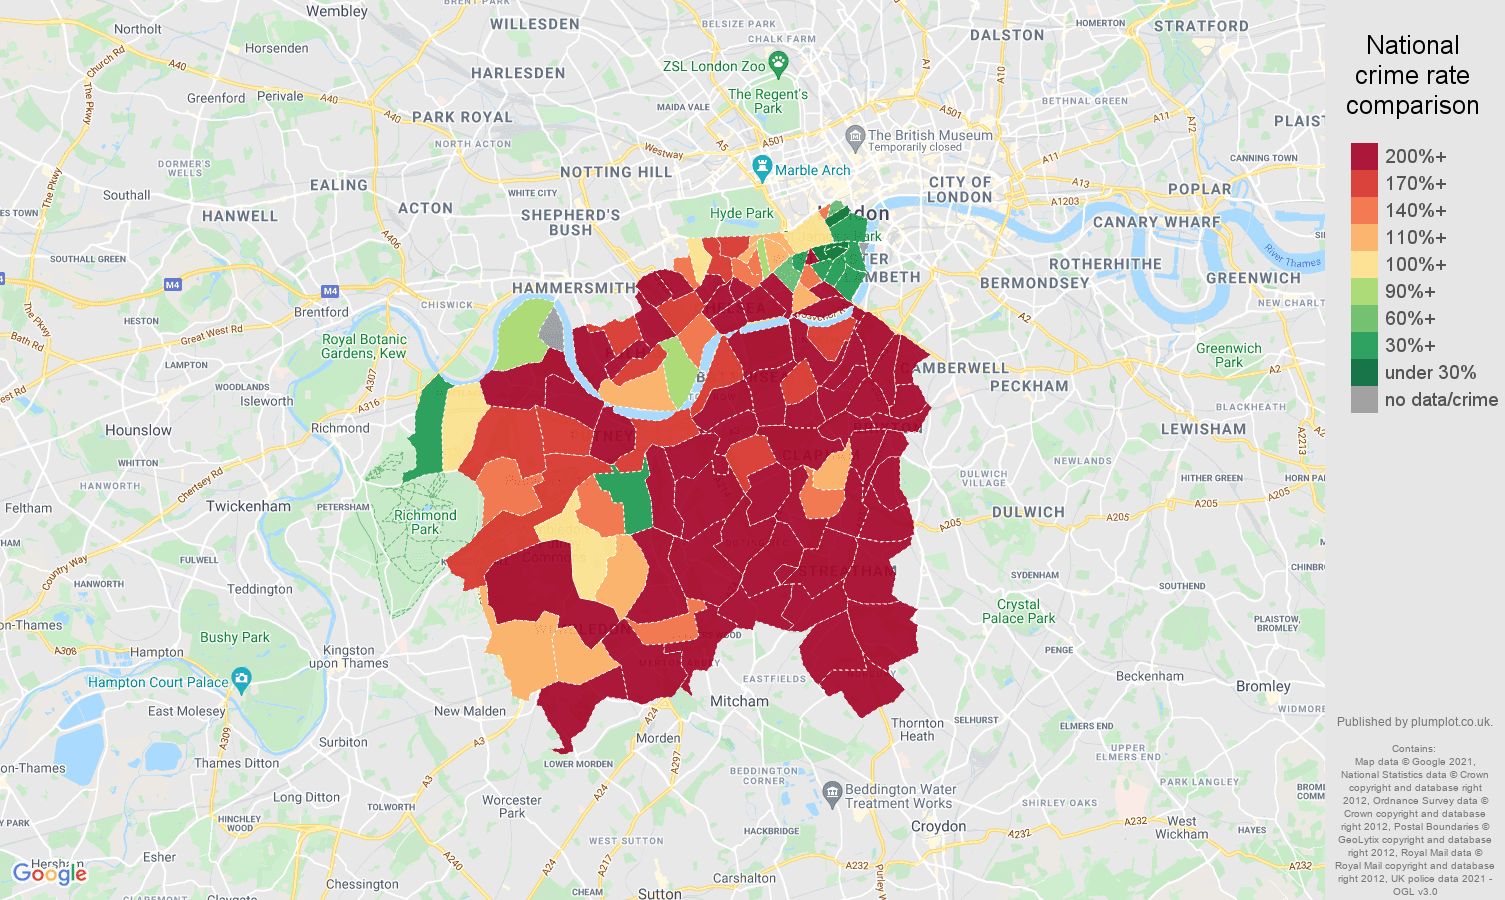 South West London robbery crime rate comparison map